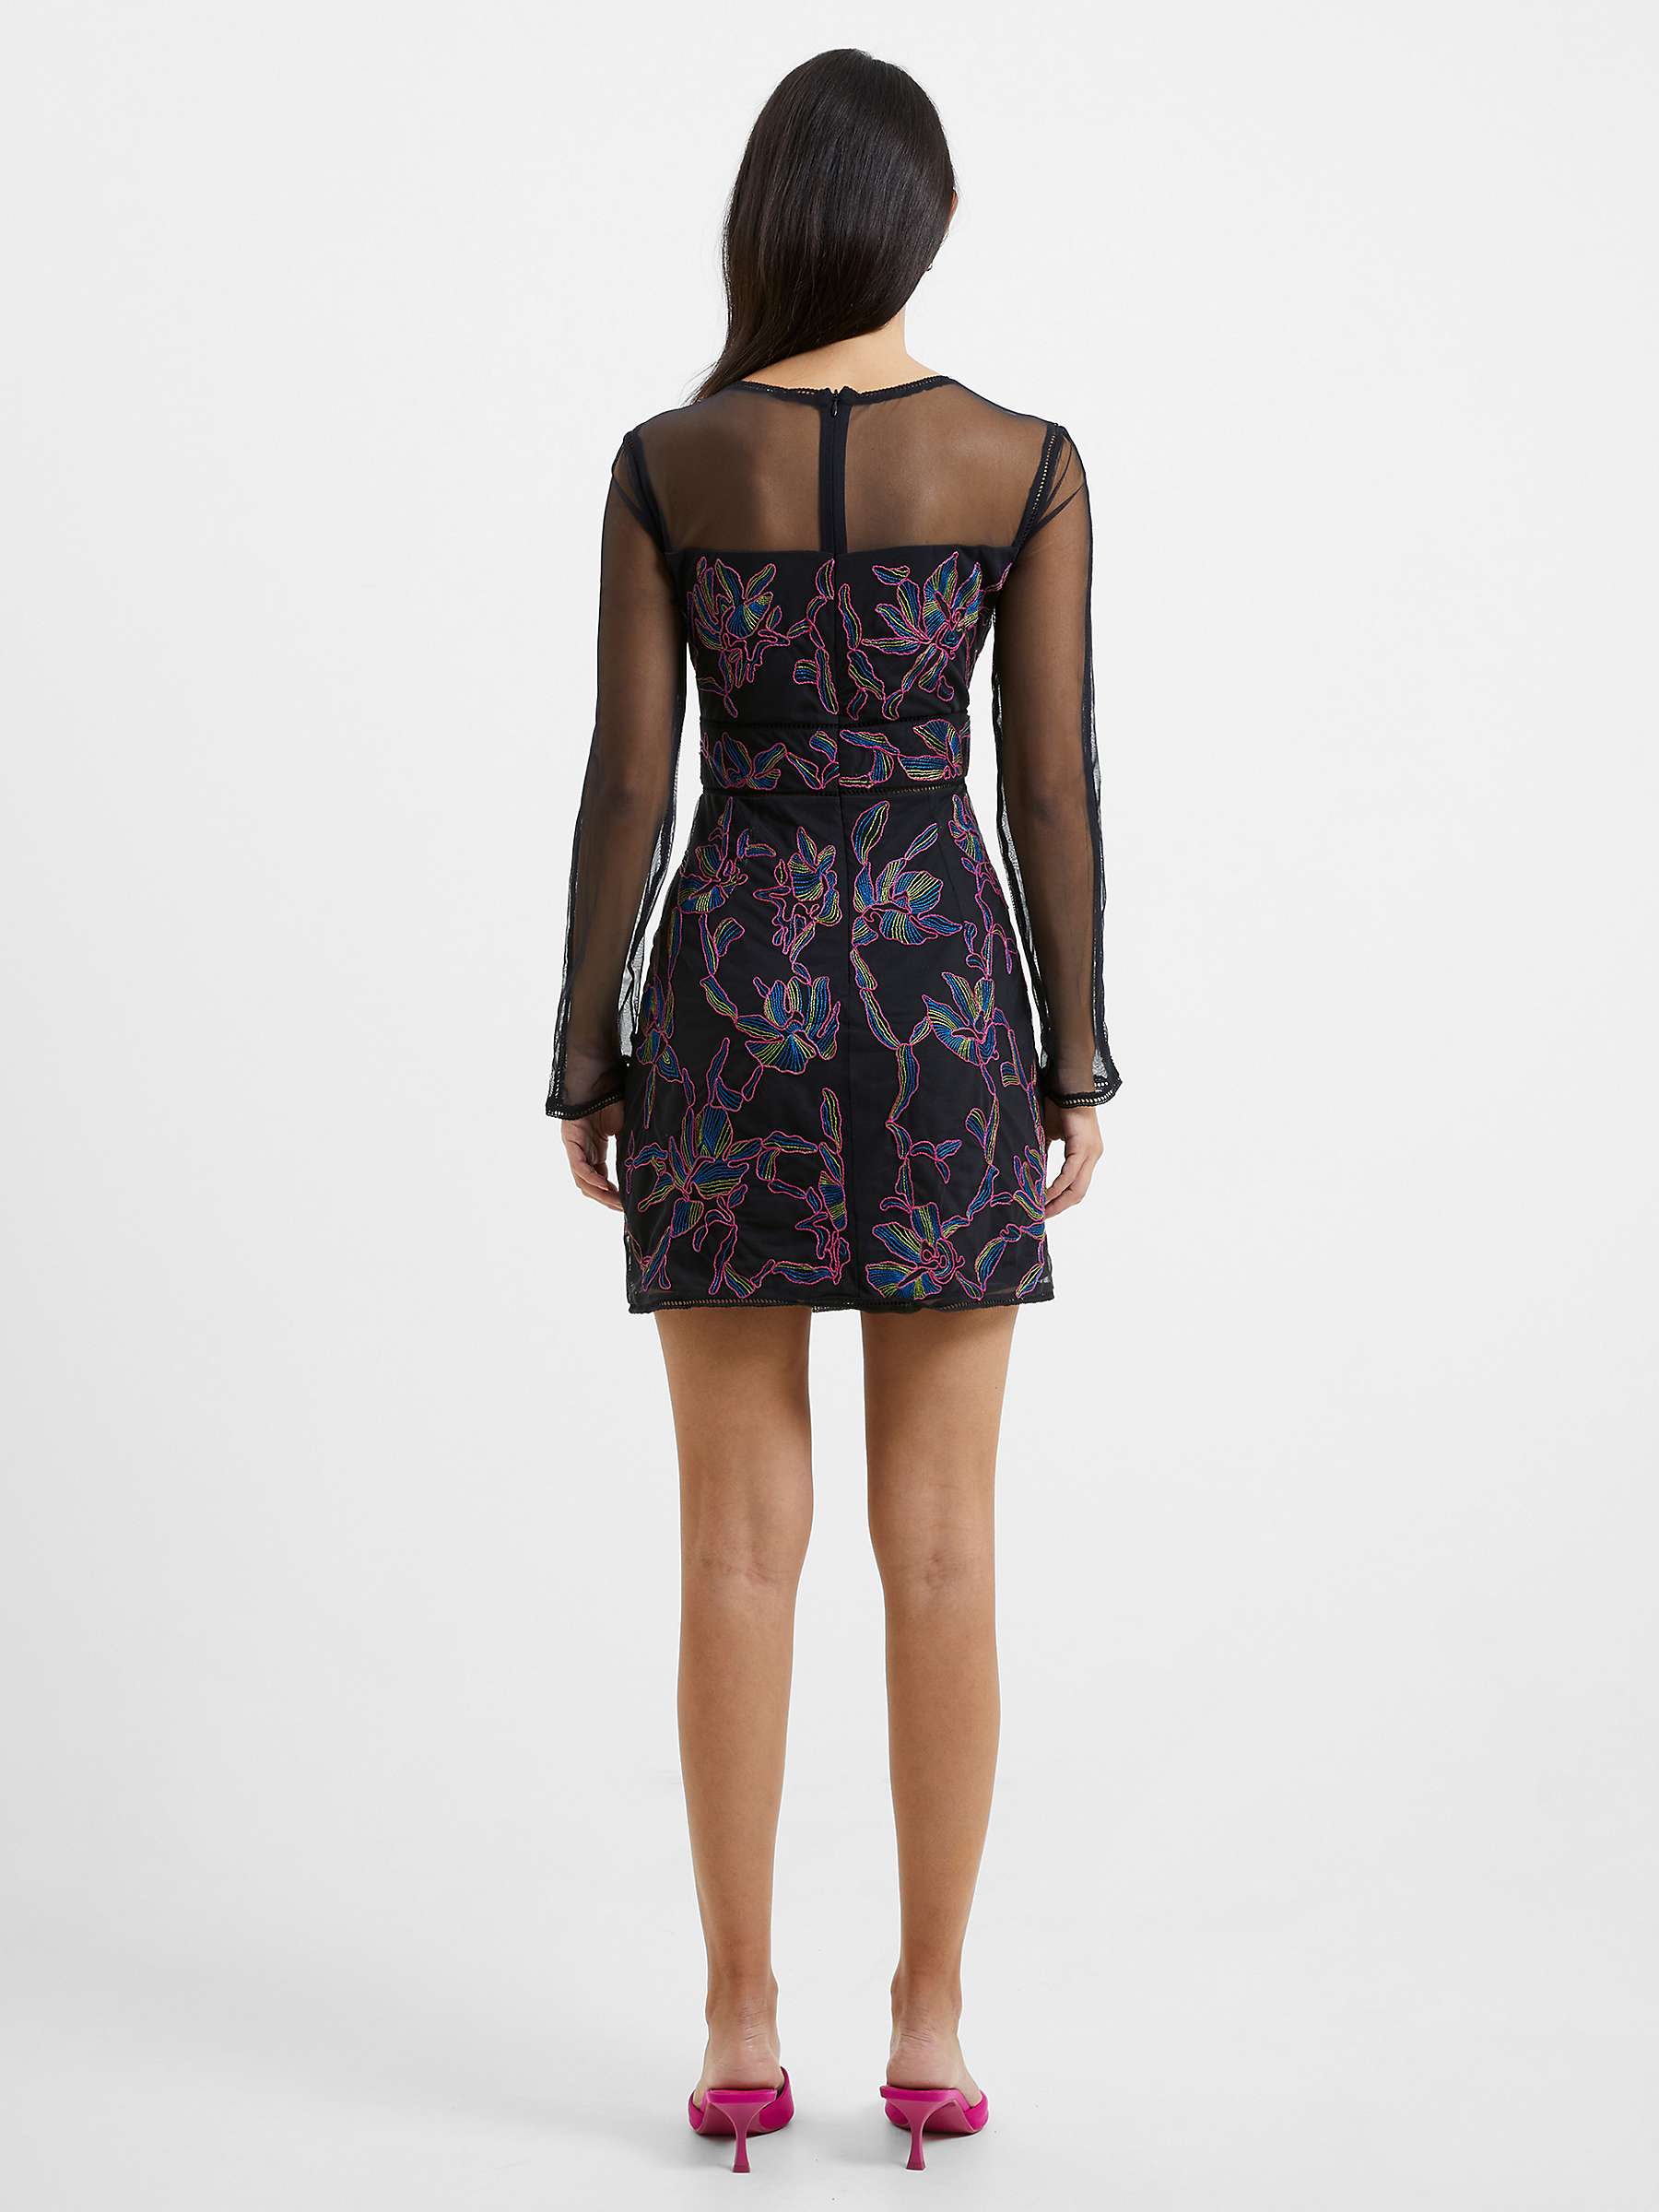 Buy French Connection Emilia Embroidered Dress, Black/Multi Online at johnlewis.com